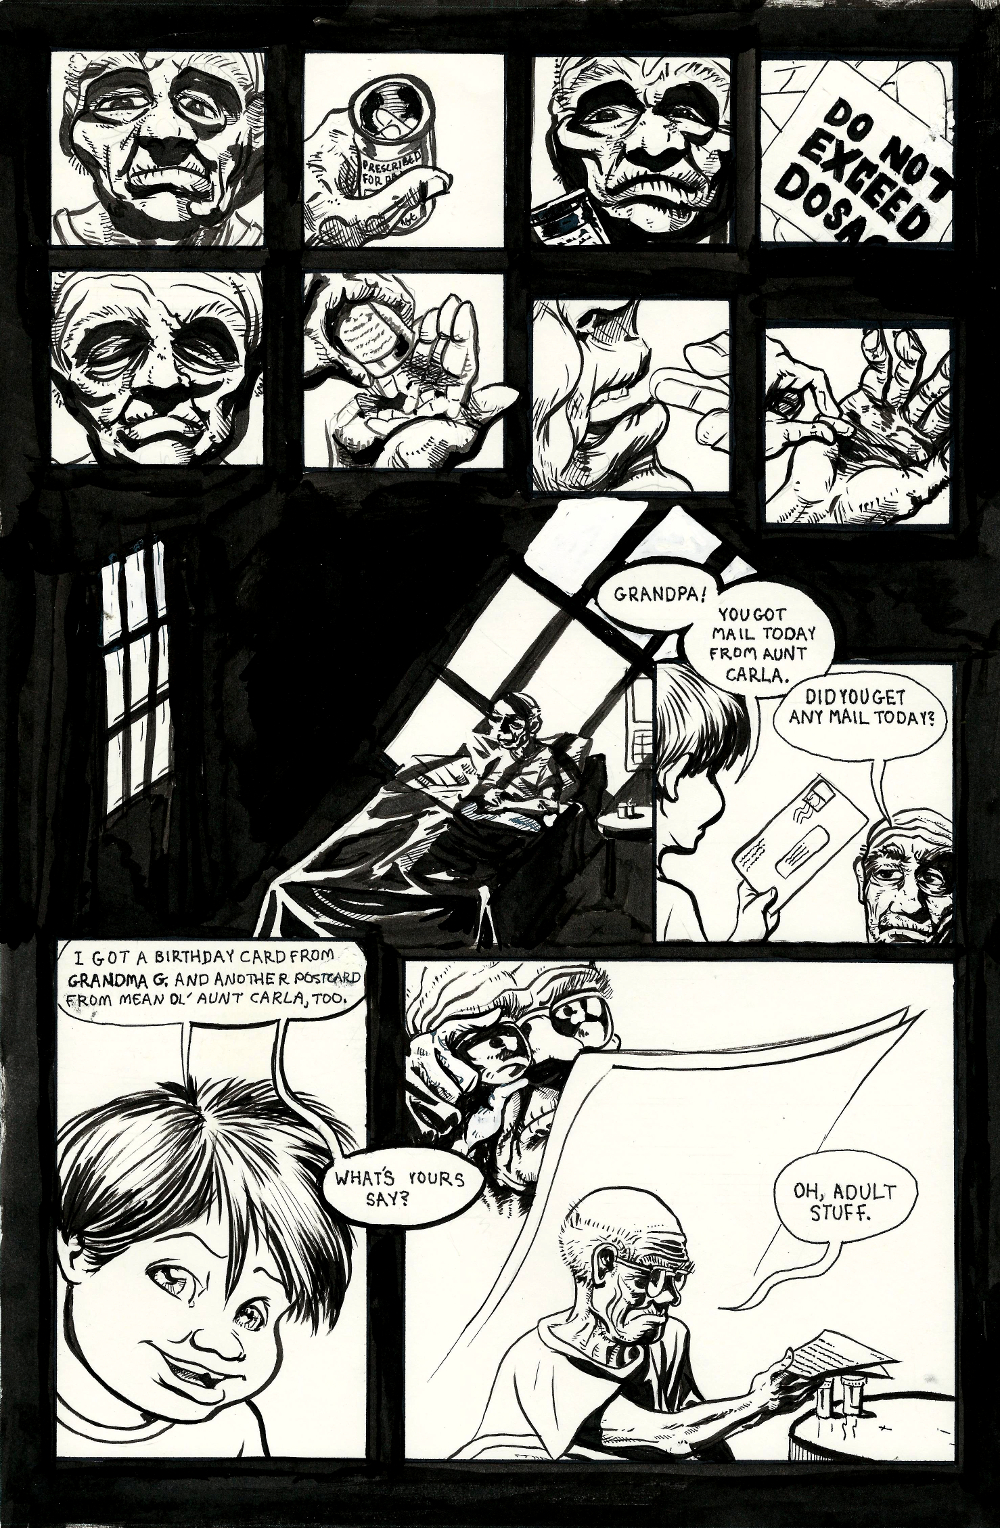 The Talk – Page 1